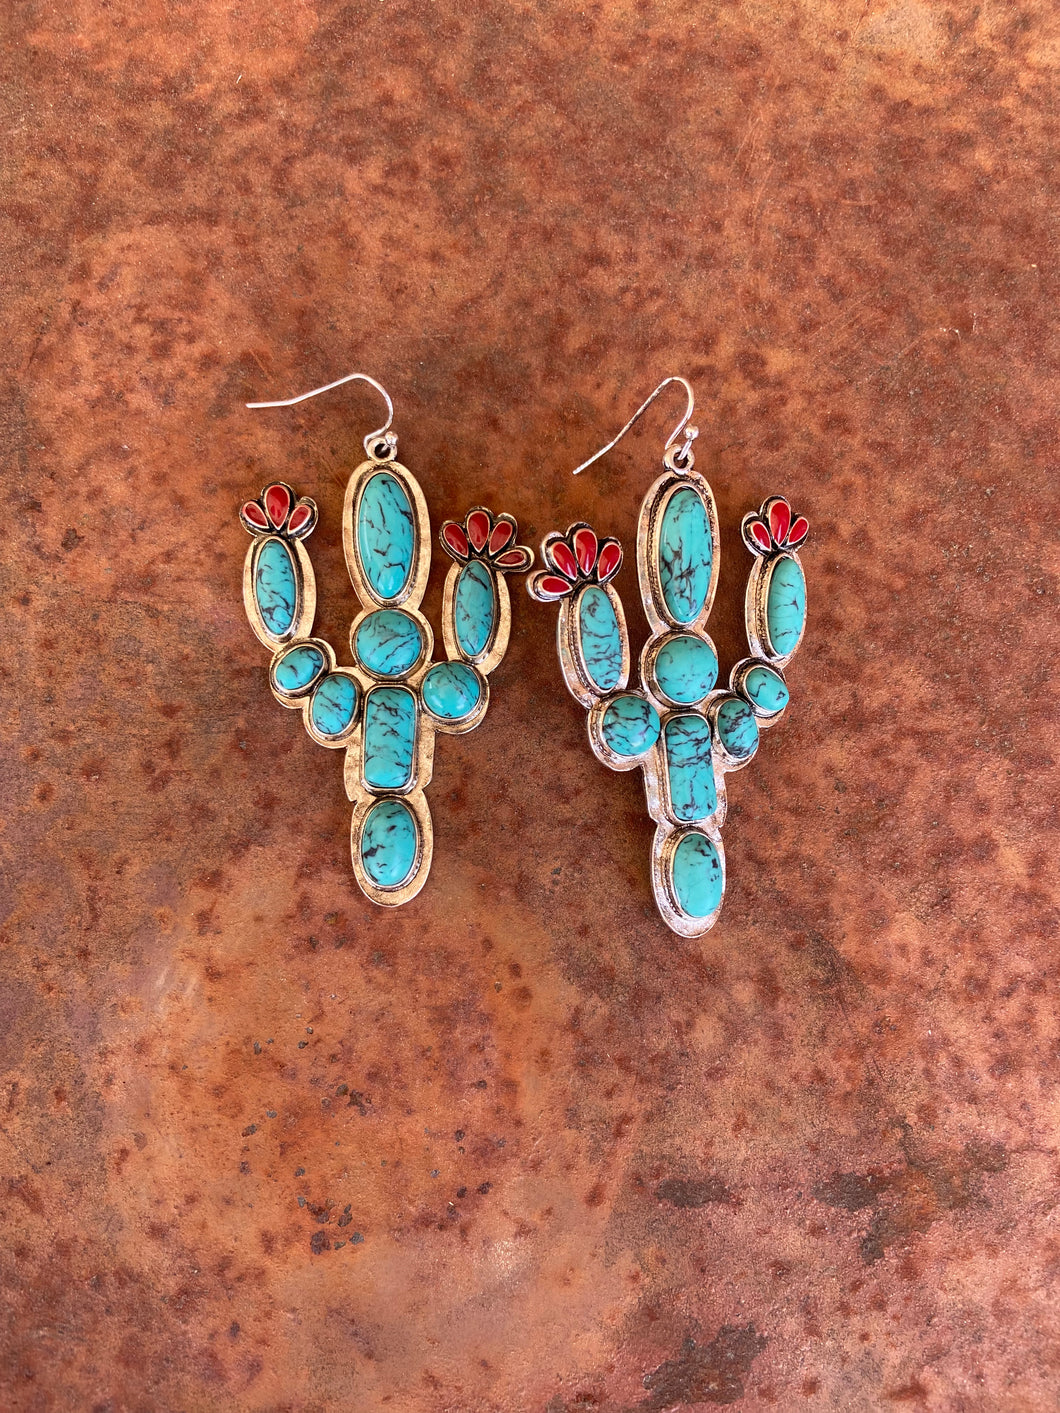 THE CACTUS BLOSSOM EARRINGS